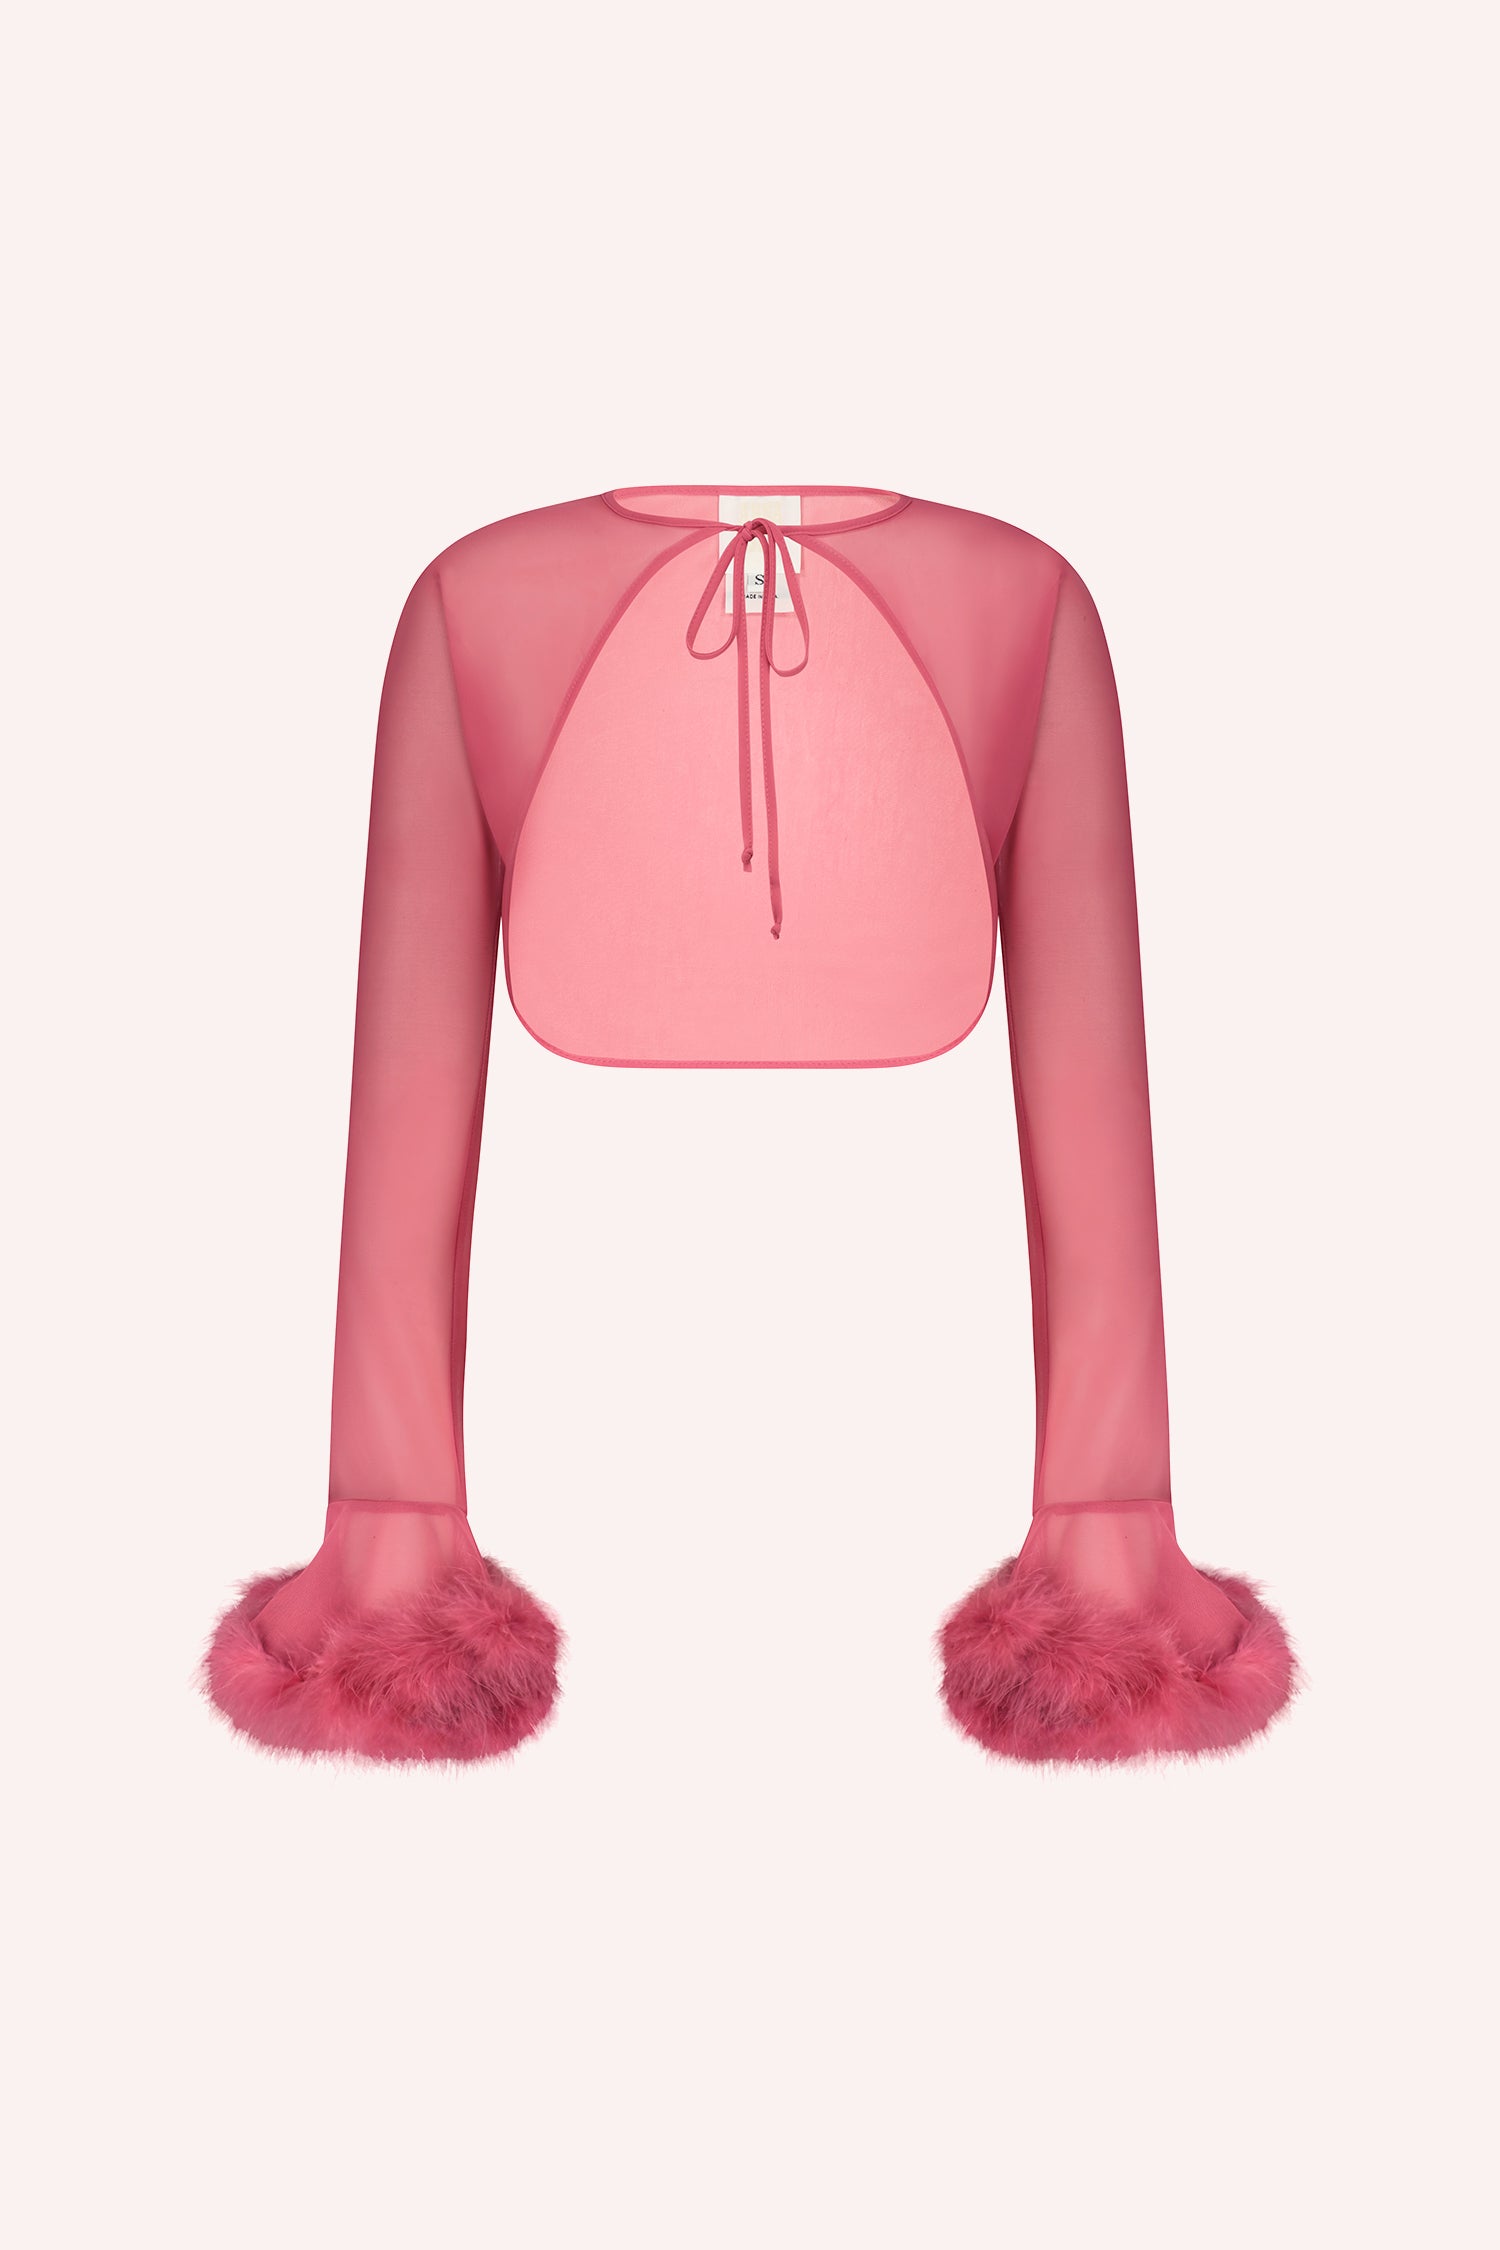 Bolero, long sleeves, pink, fluffy fur at wrist, open in front, see-thru, cover arms, shoulder, back